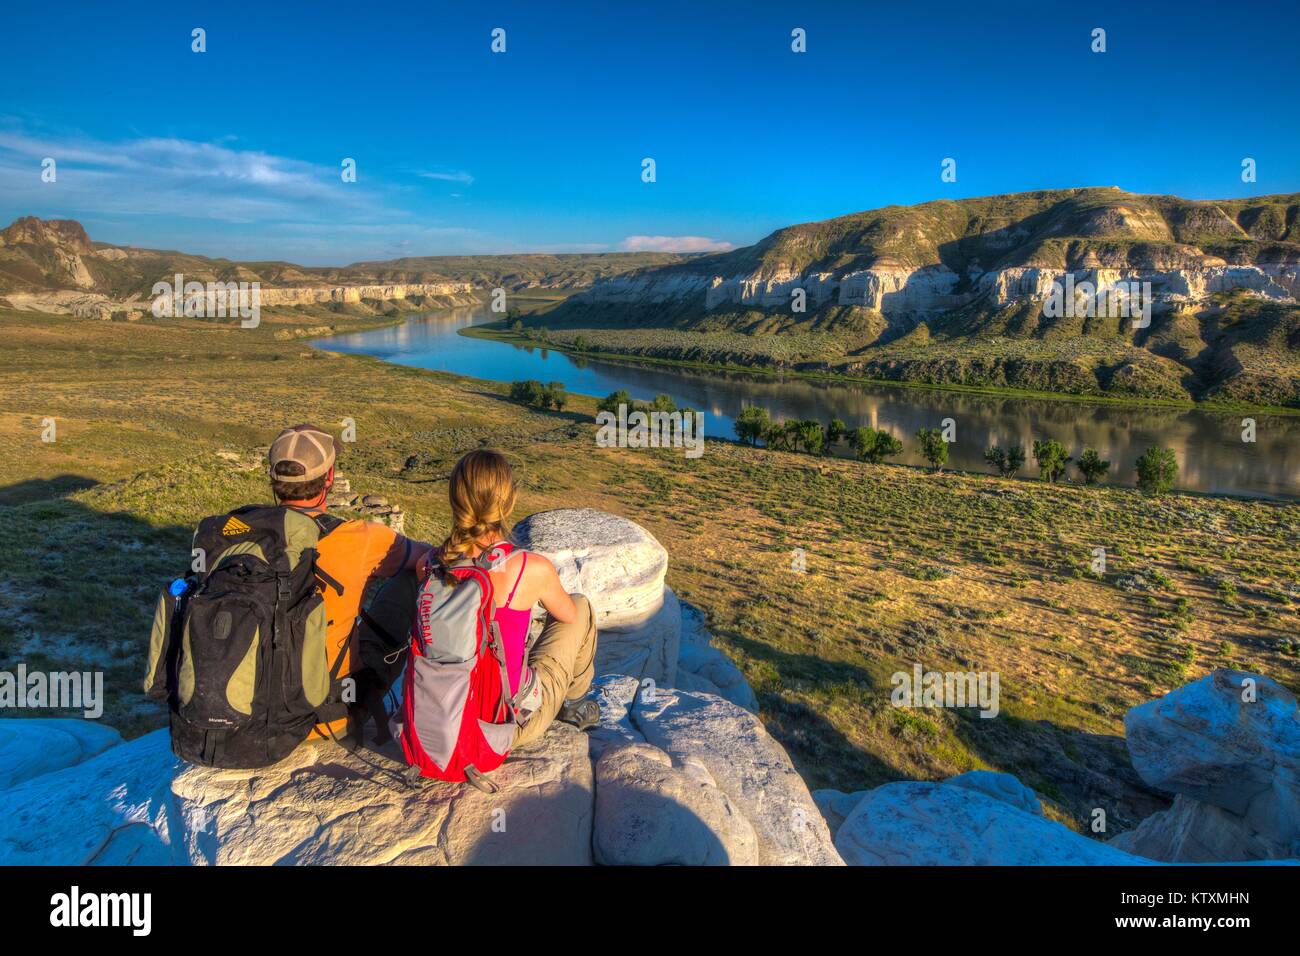 Hikers look out on the Upper Missouri Wild and Scenic River in the Upper Missouri River Breaks National Monument June 27, 2017 near Lewistown, Montana. Stock Photo